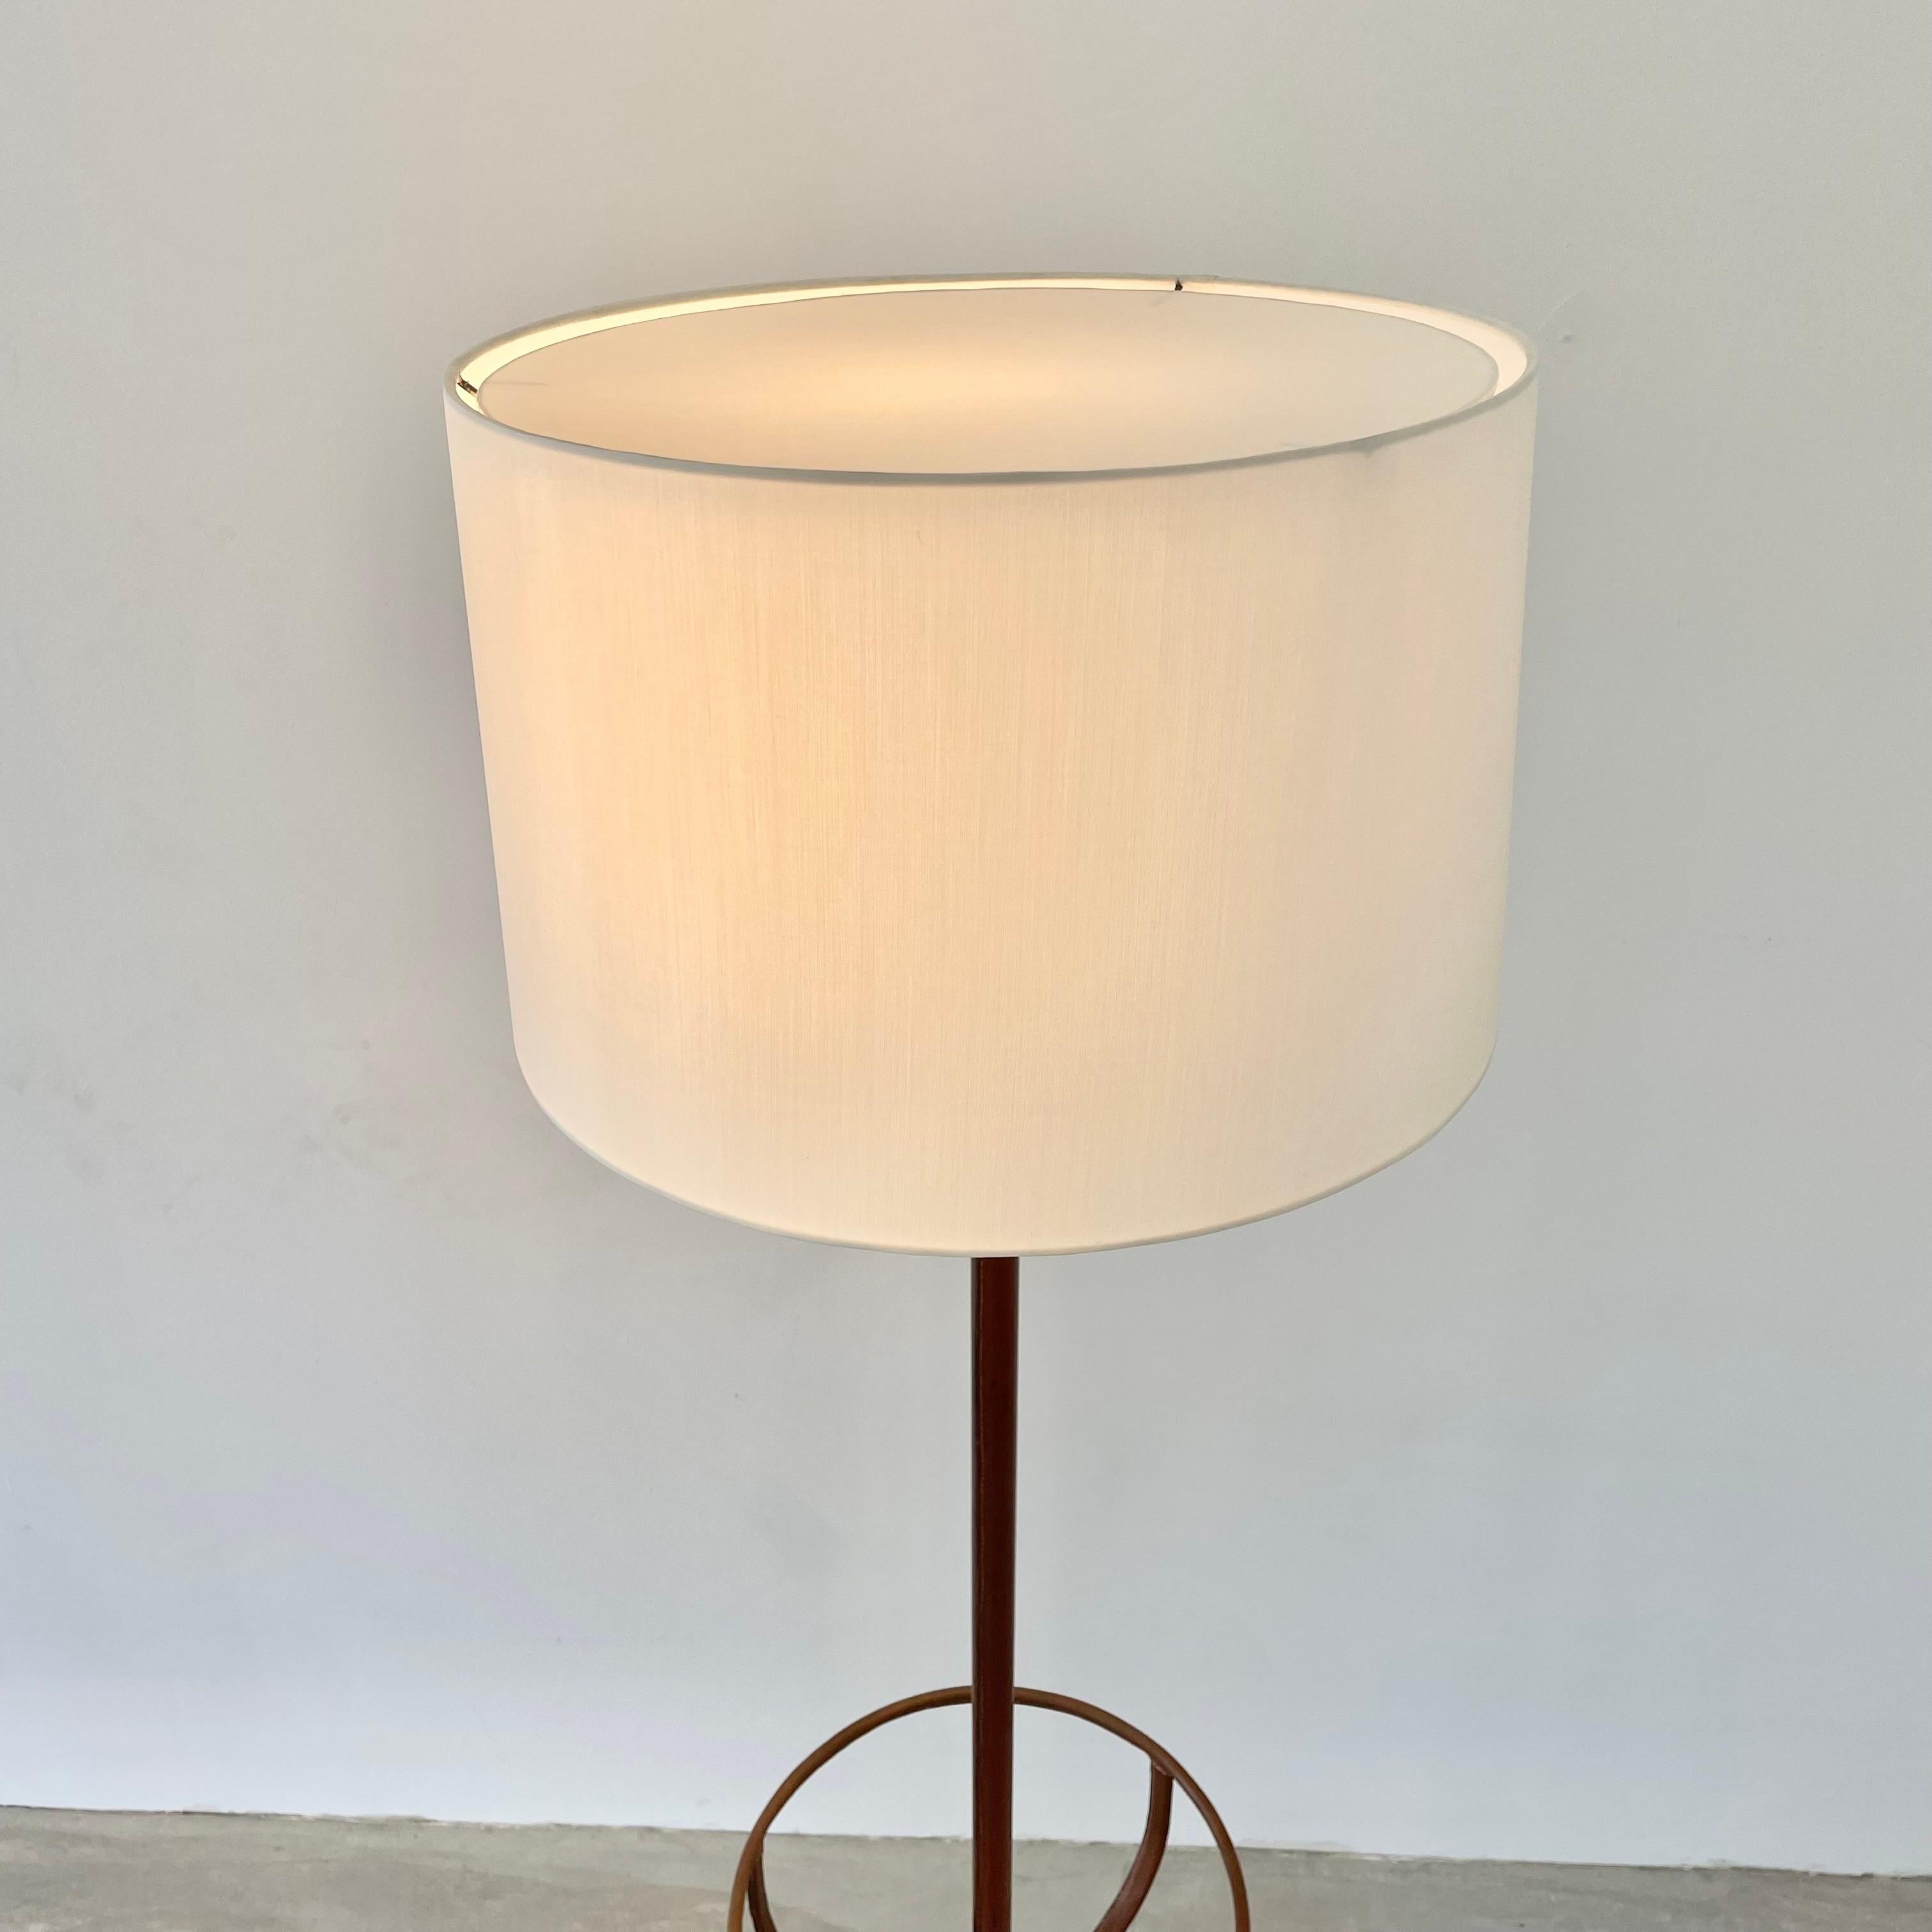 Jacques Adnet Floor Lamp in Saddle Leather, 1950s France For Sale 2